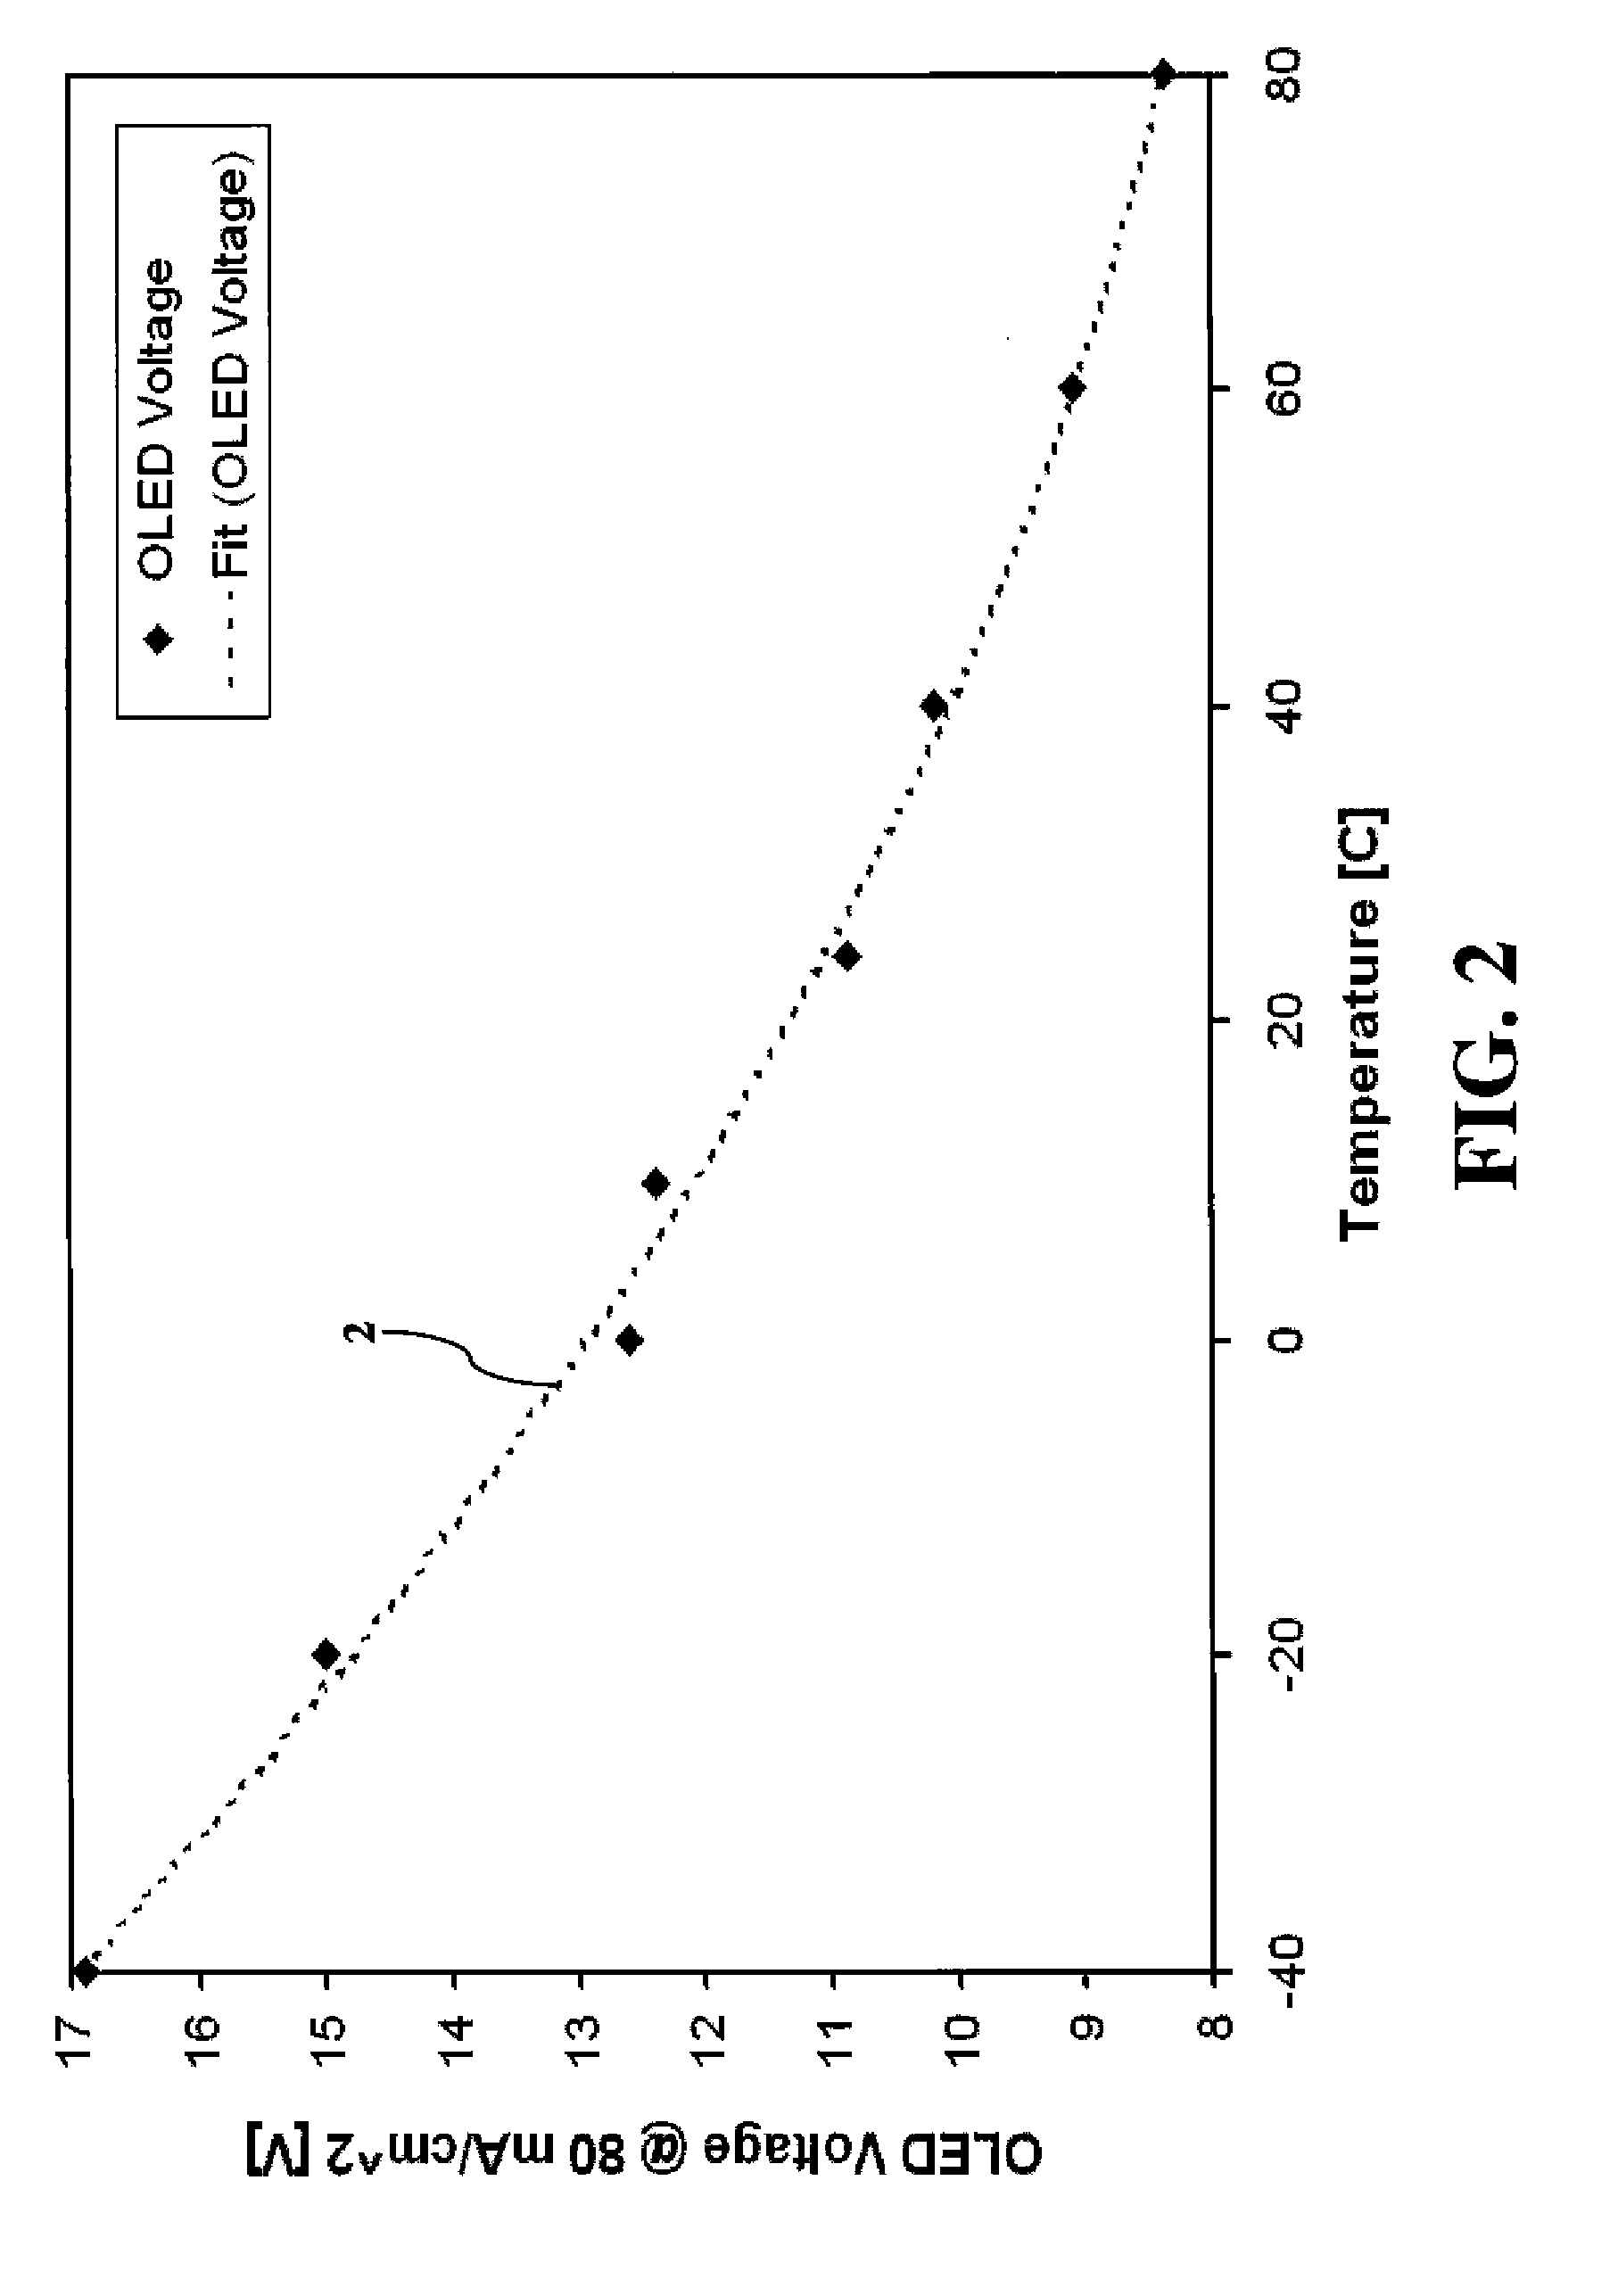 Digital-drive electroluminescent display with aging compensation